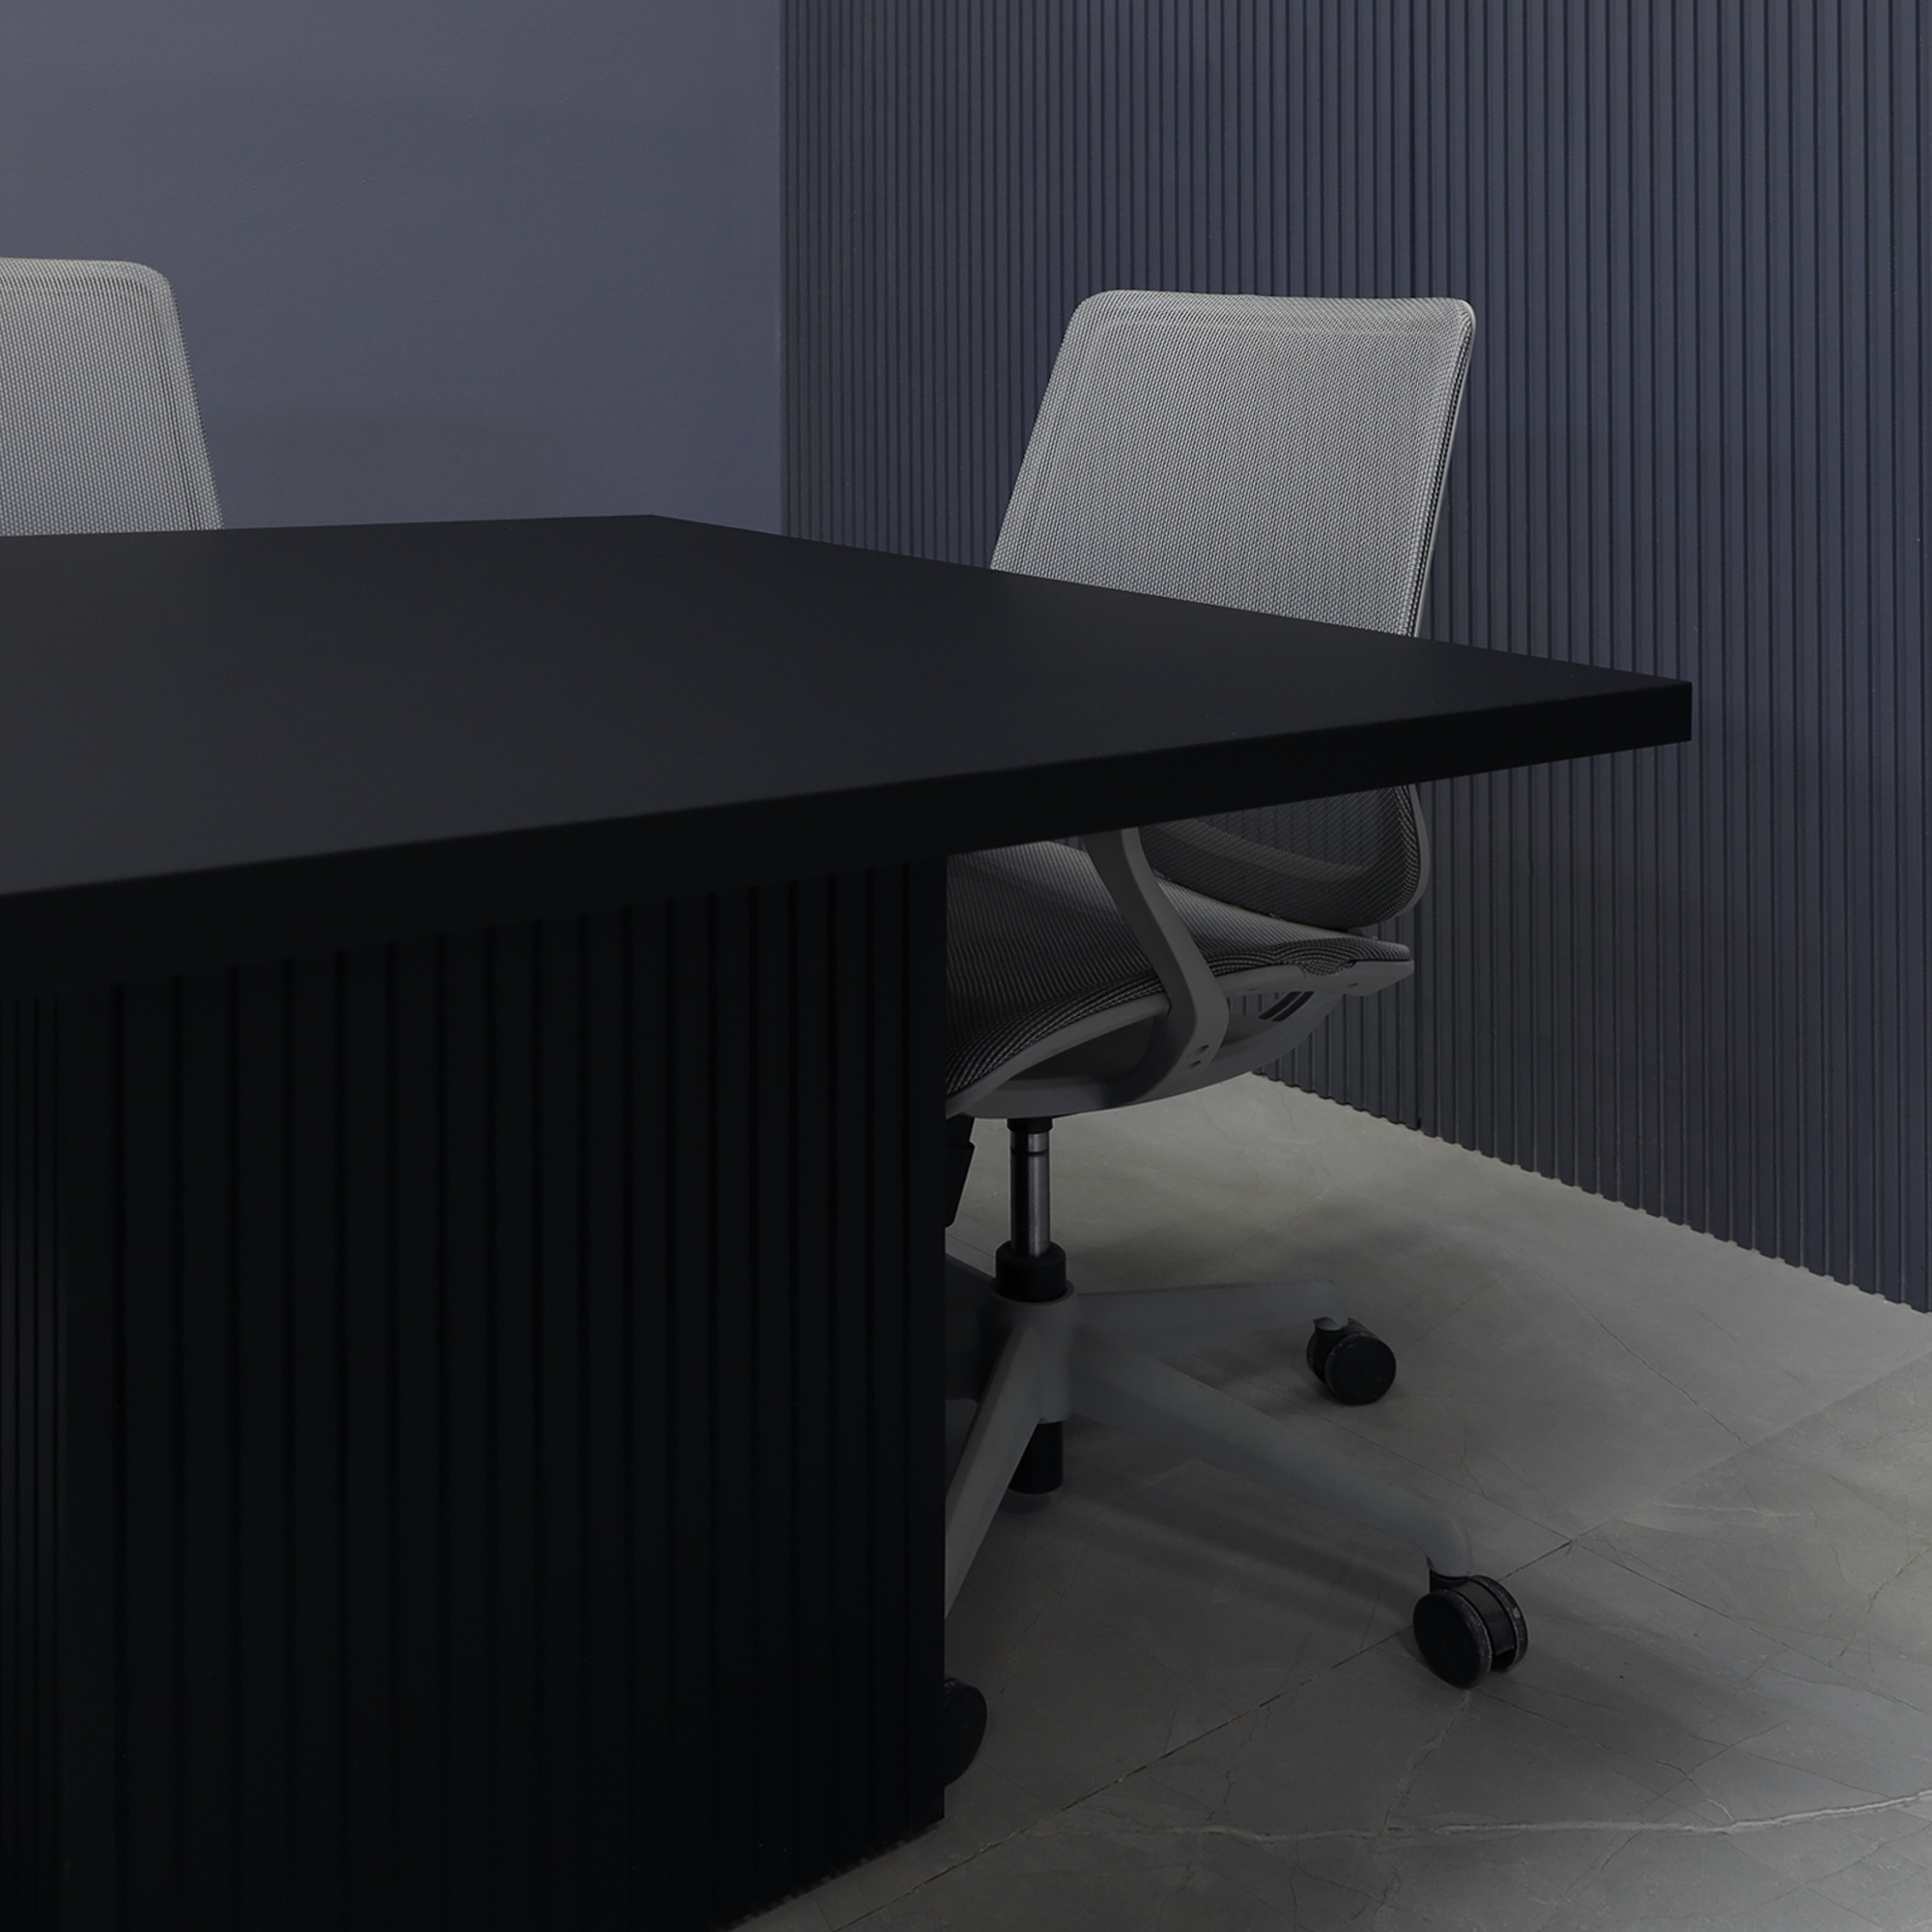 42-inch Newton Square Conference Table in black traceless laminate top and black traceless tambour base, shown here.